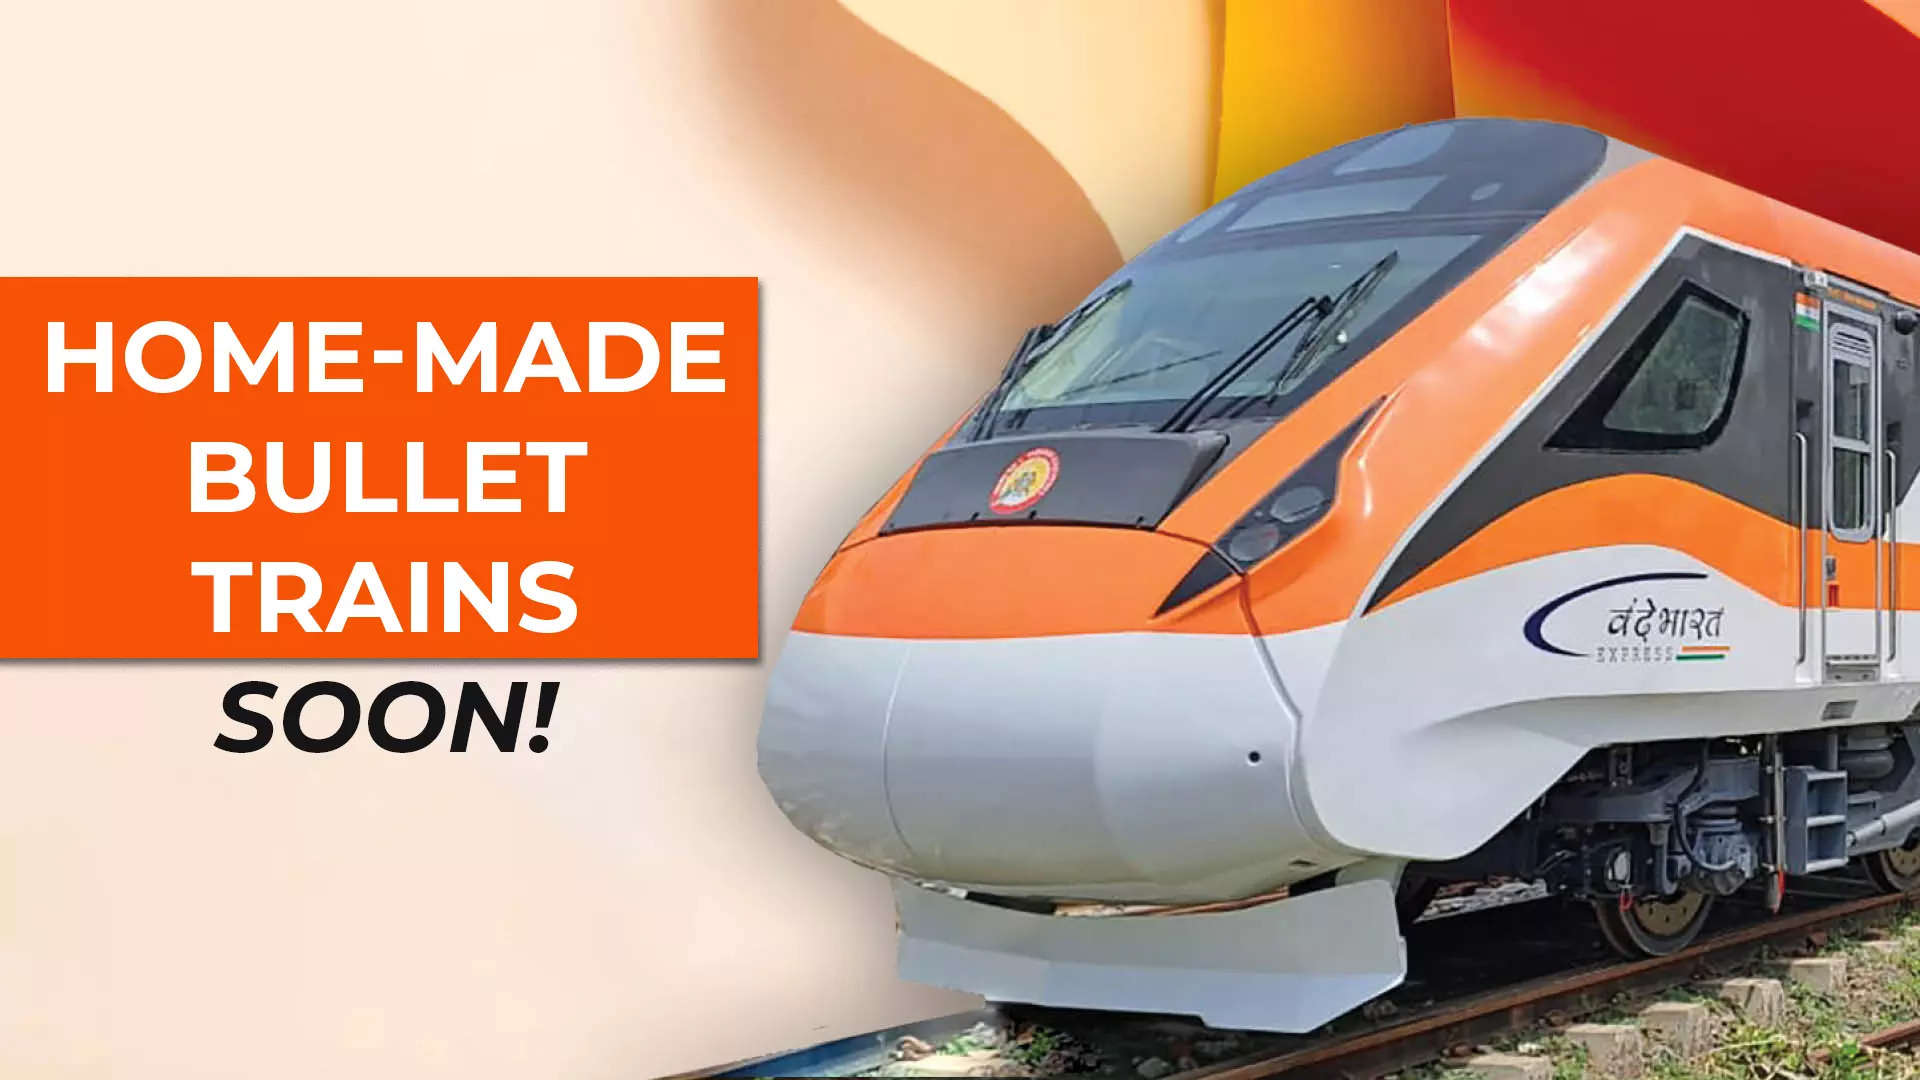 High-speed trains are defined as those capable of traveling at speeds exceeding 250 kmph